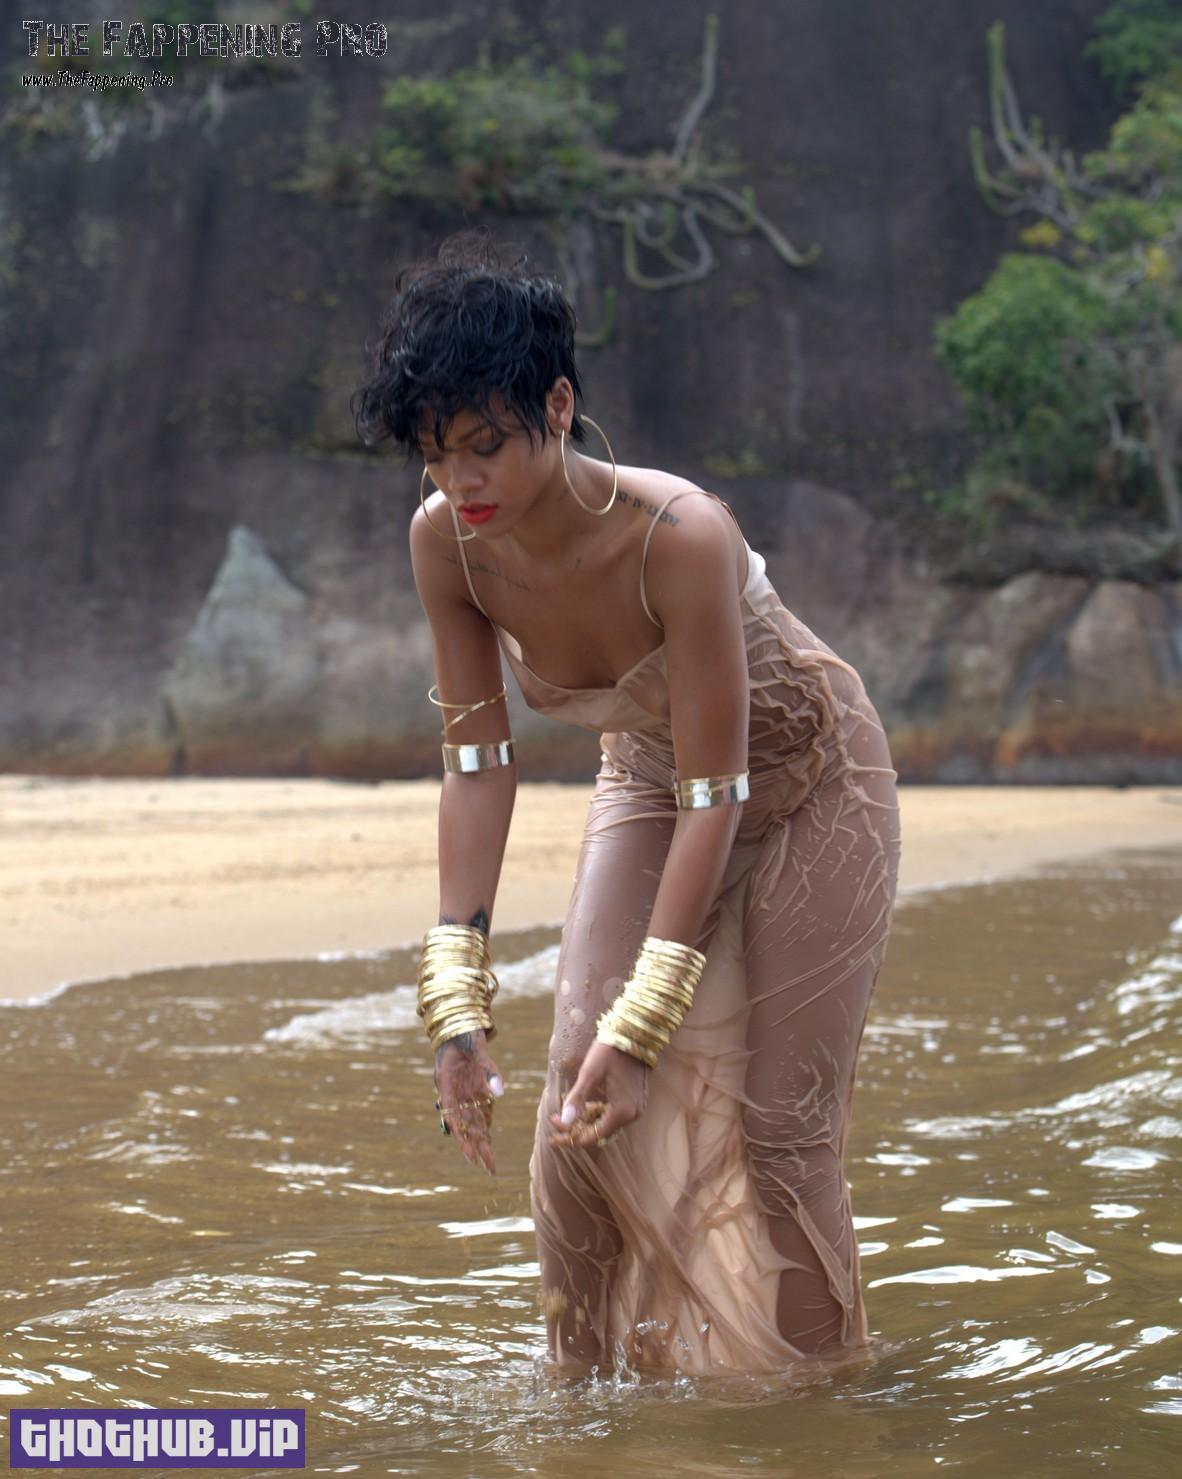 1694495674 947 Rihanna Nude Unpublished Outtakes From 2014 44 Photos